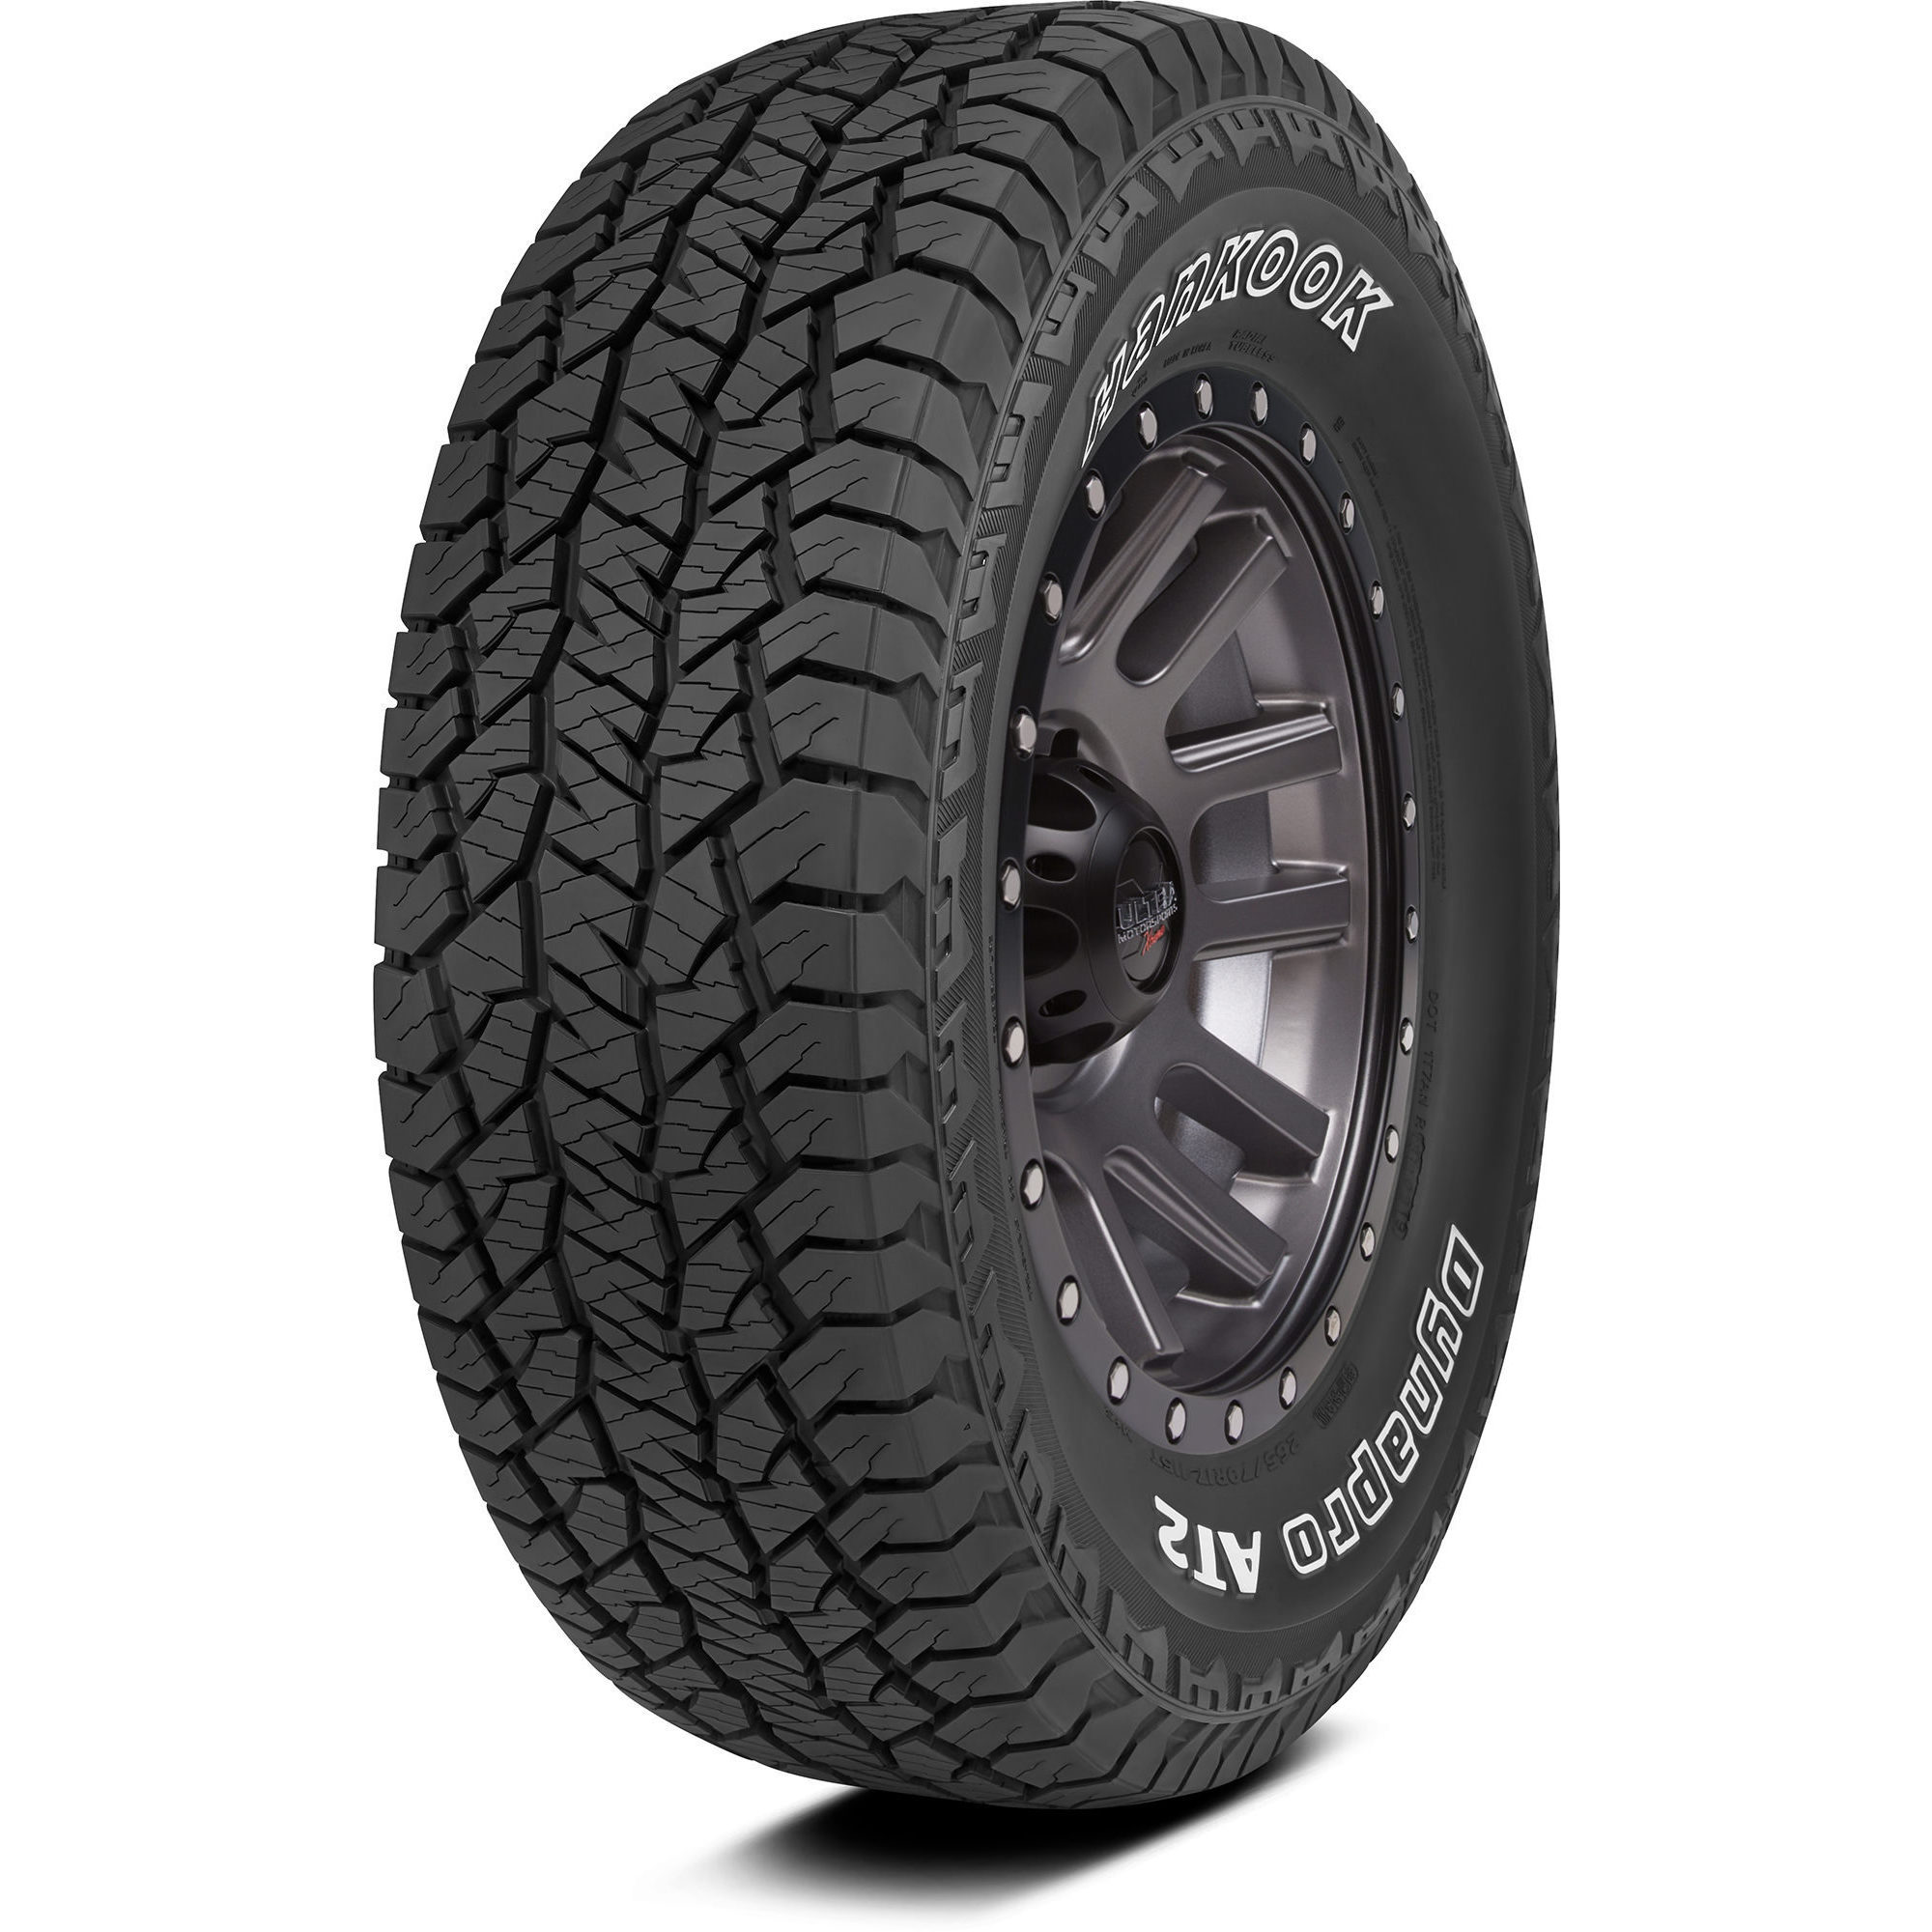 Hankook Dynapro AT2 - Tyre Reviews and Tests